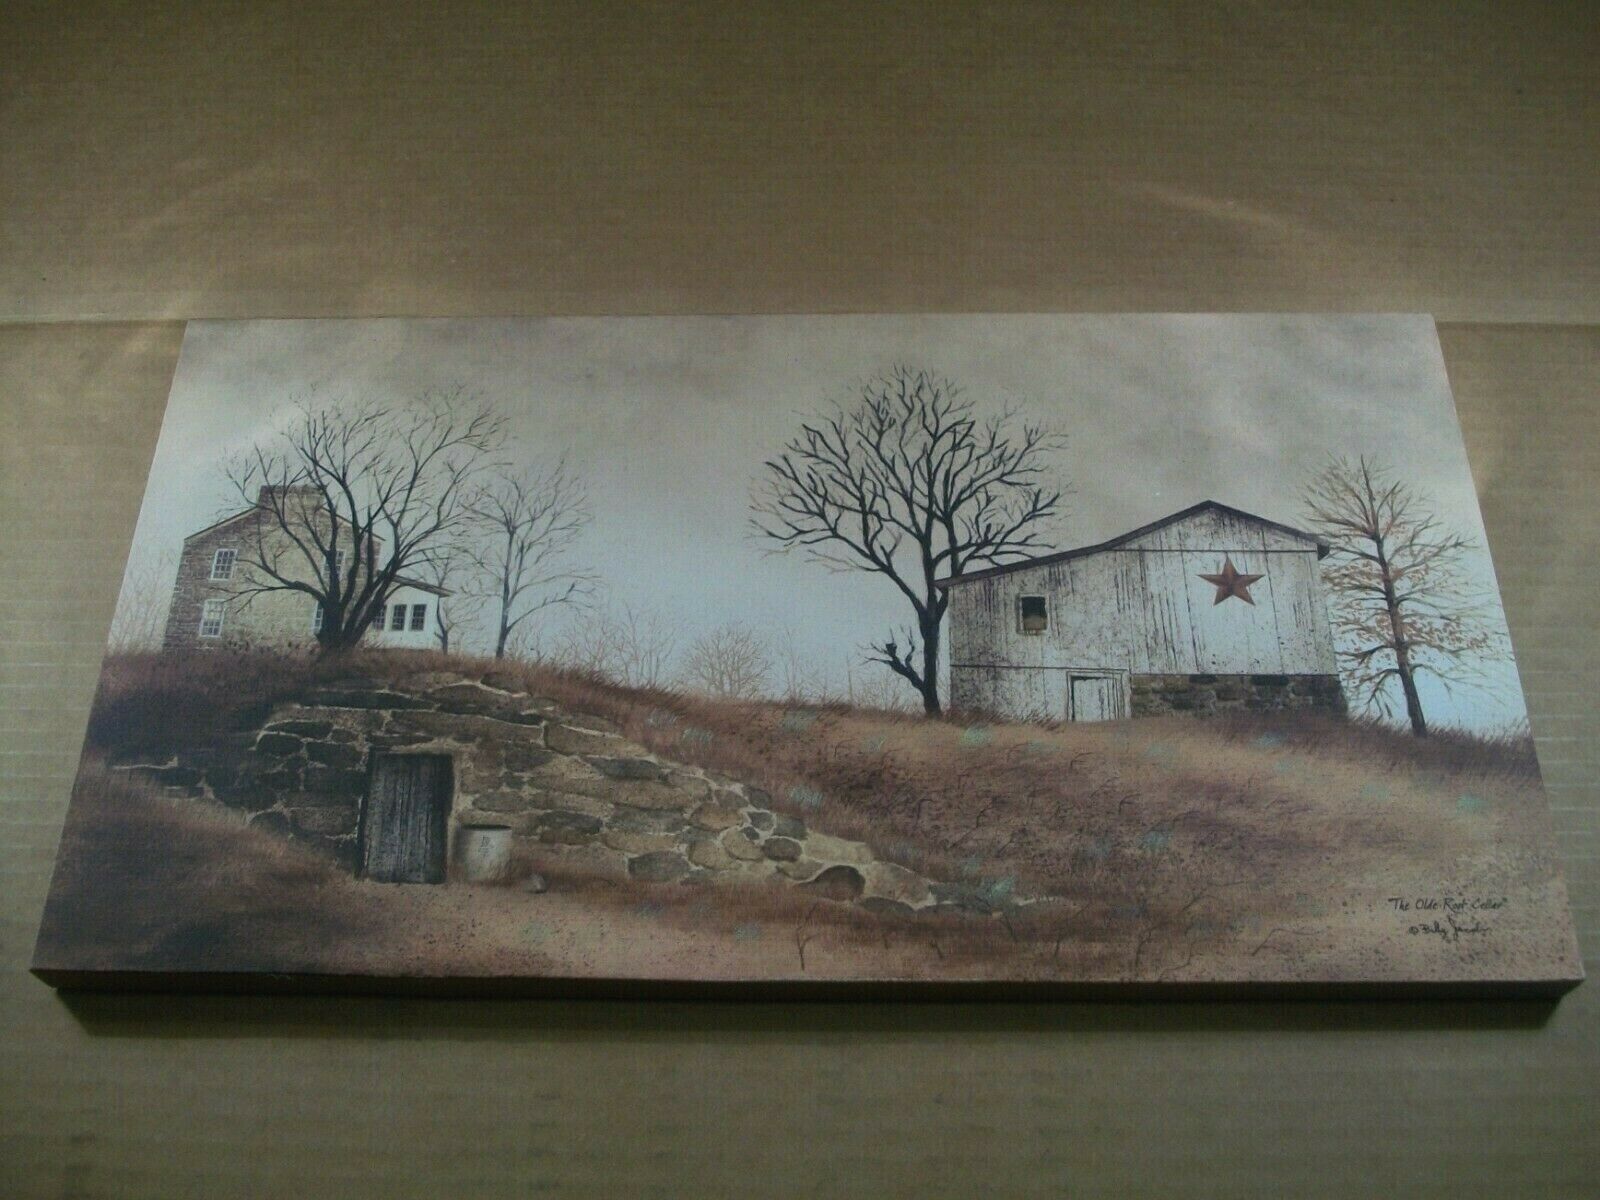 Primitive, Rustic Stretch Canvas Painting "the Olde Root Cellar" By Billy Jacobs